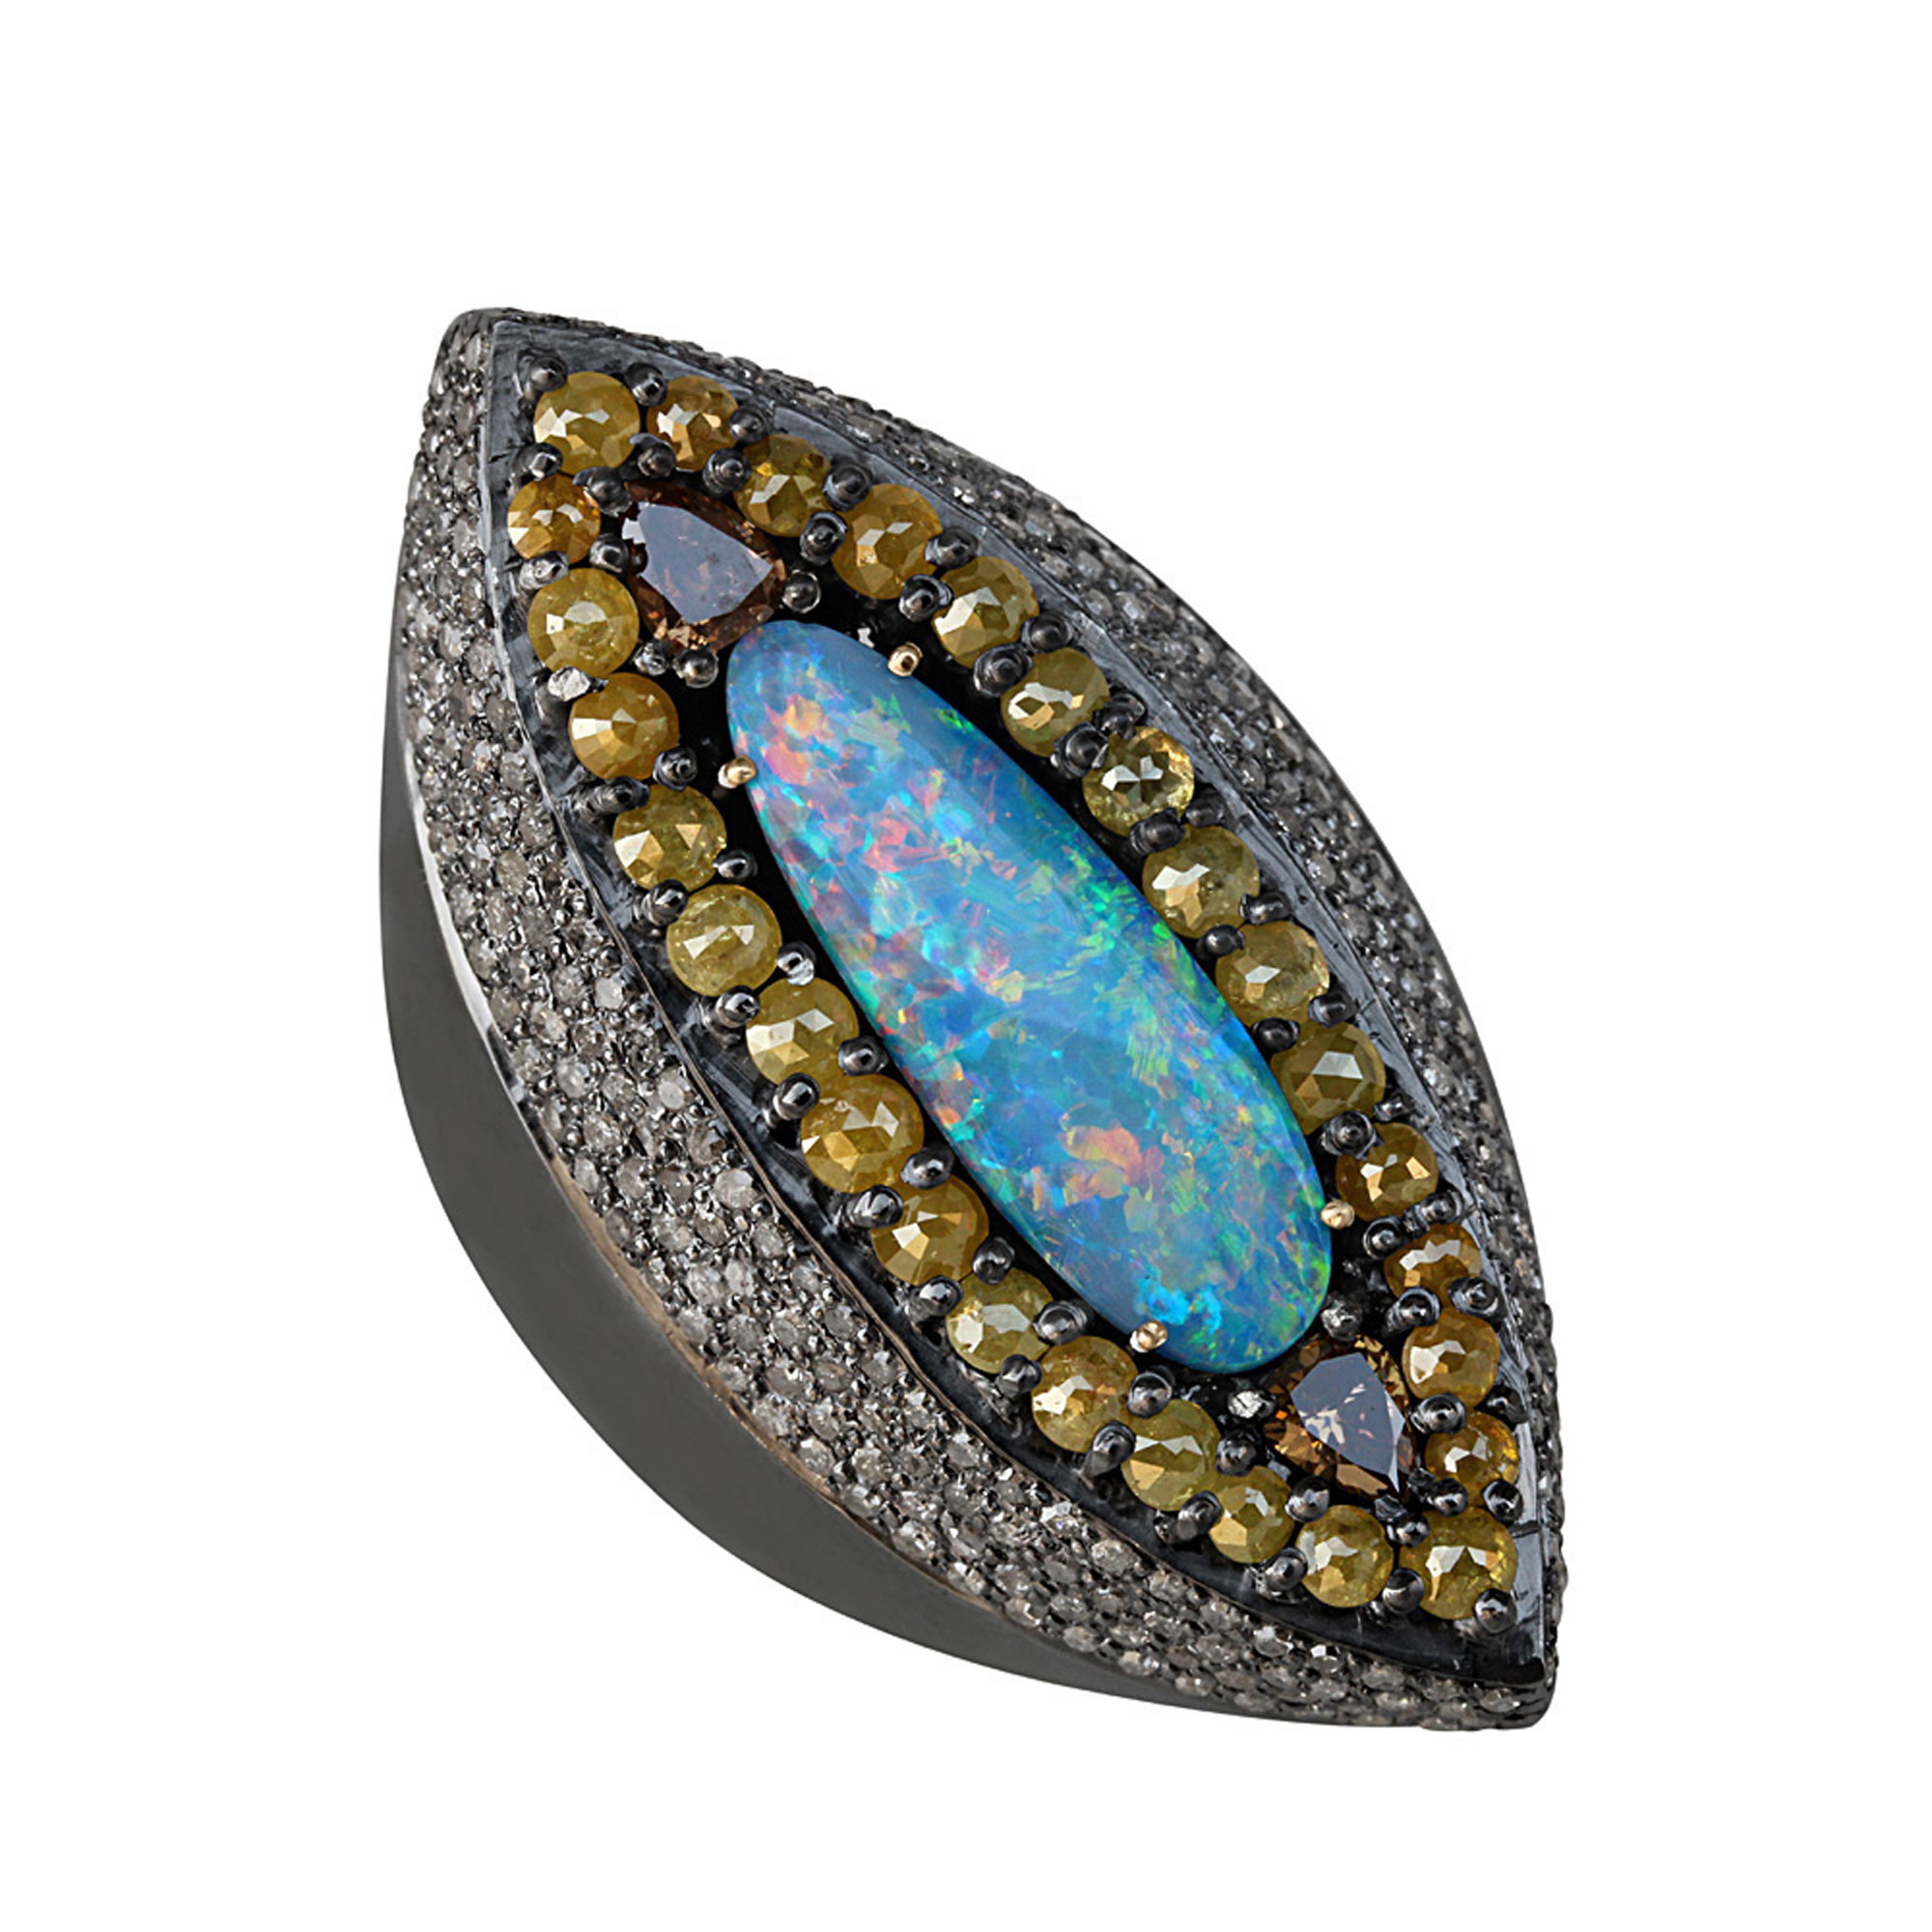 Gold & silver pave diamond fine ring adorned with opal